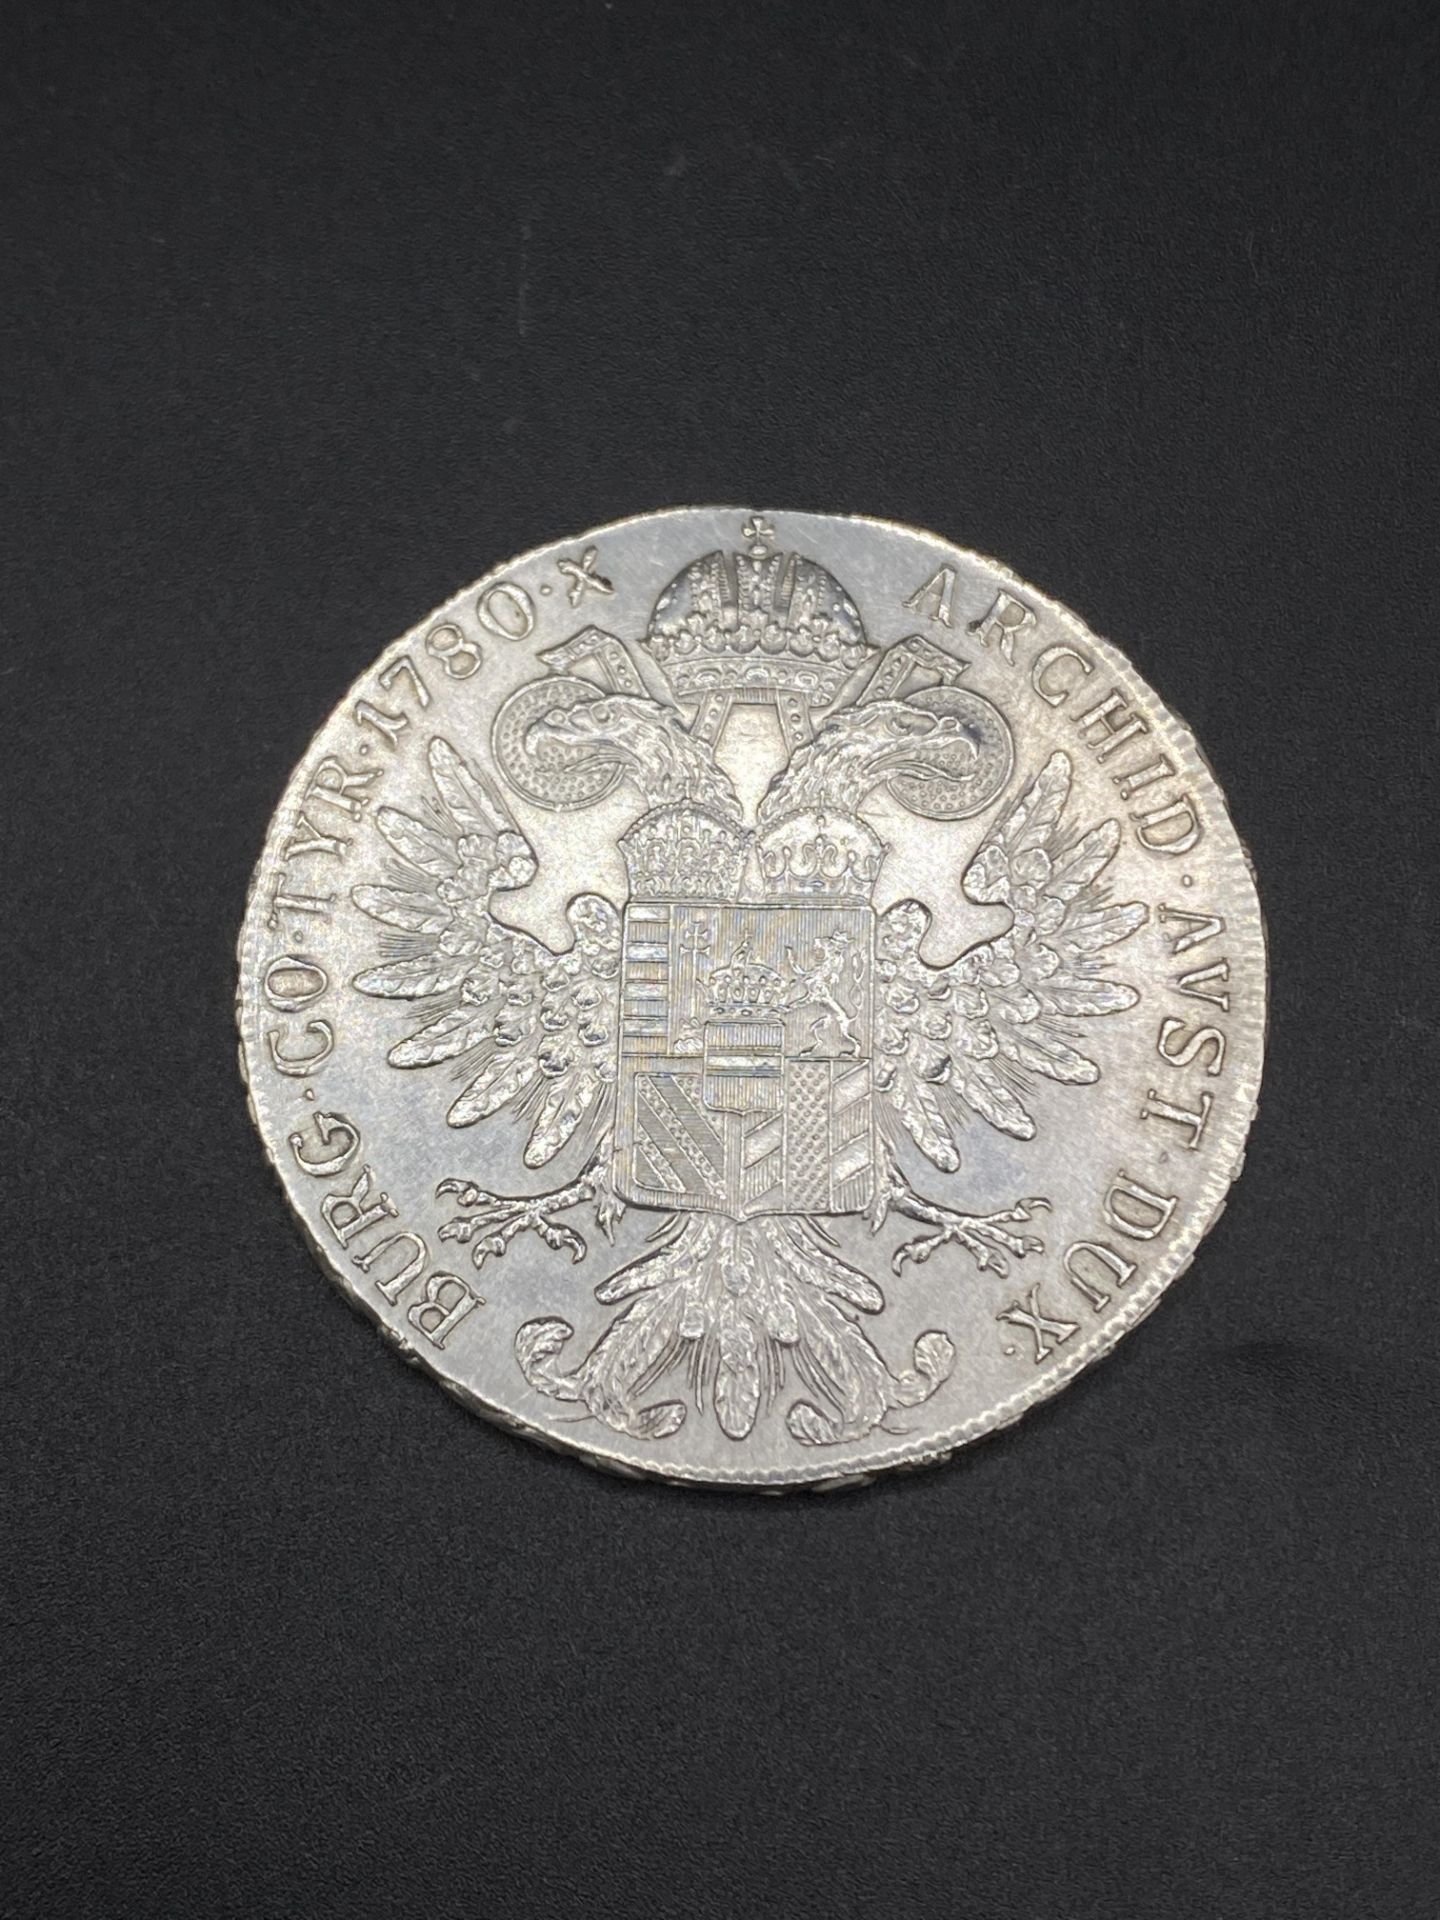 Maria Theresa Thaler, 1780 and other coins - Image 5 of 14